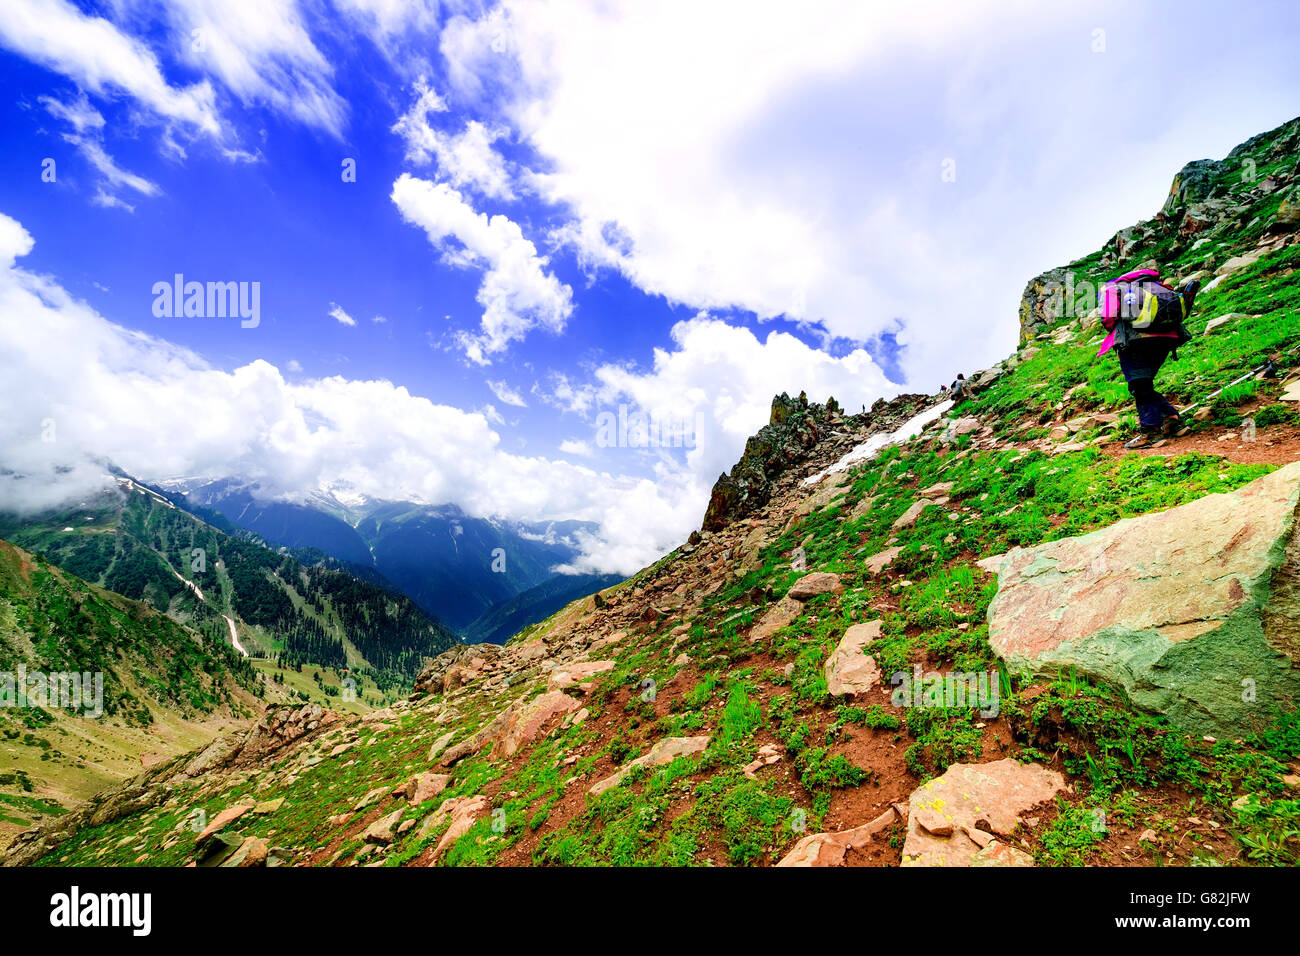 Beautiful mountain view with snow of Sonamarg, Jammu and Kashmir state, India Stock Photo